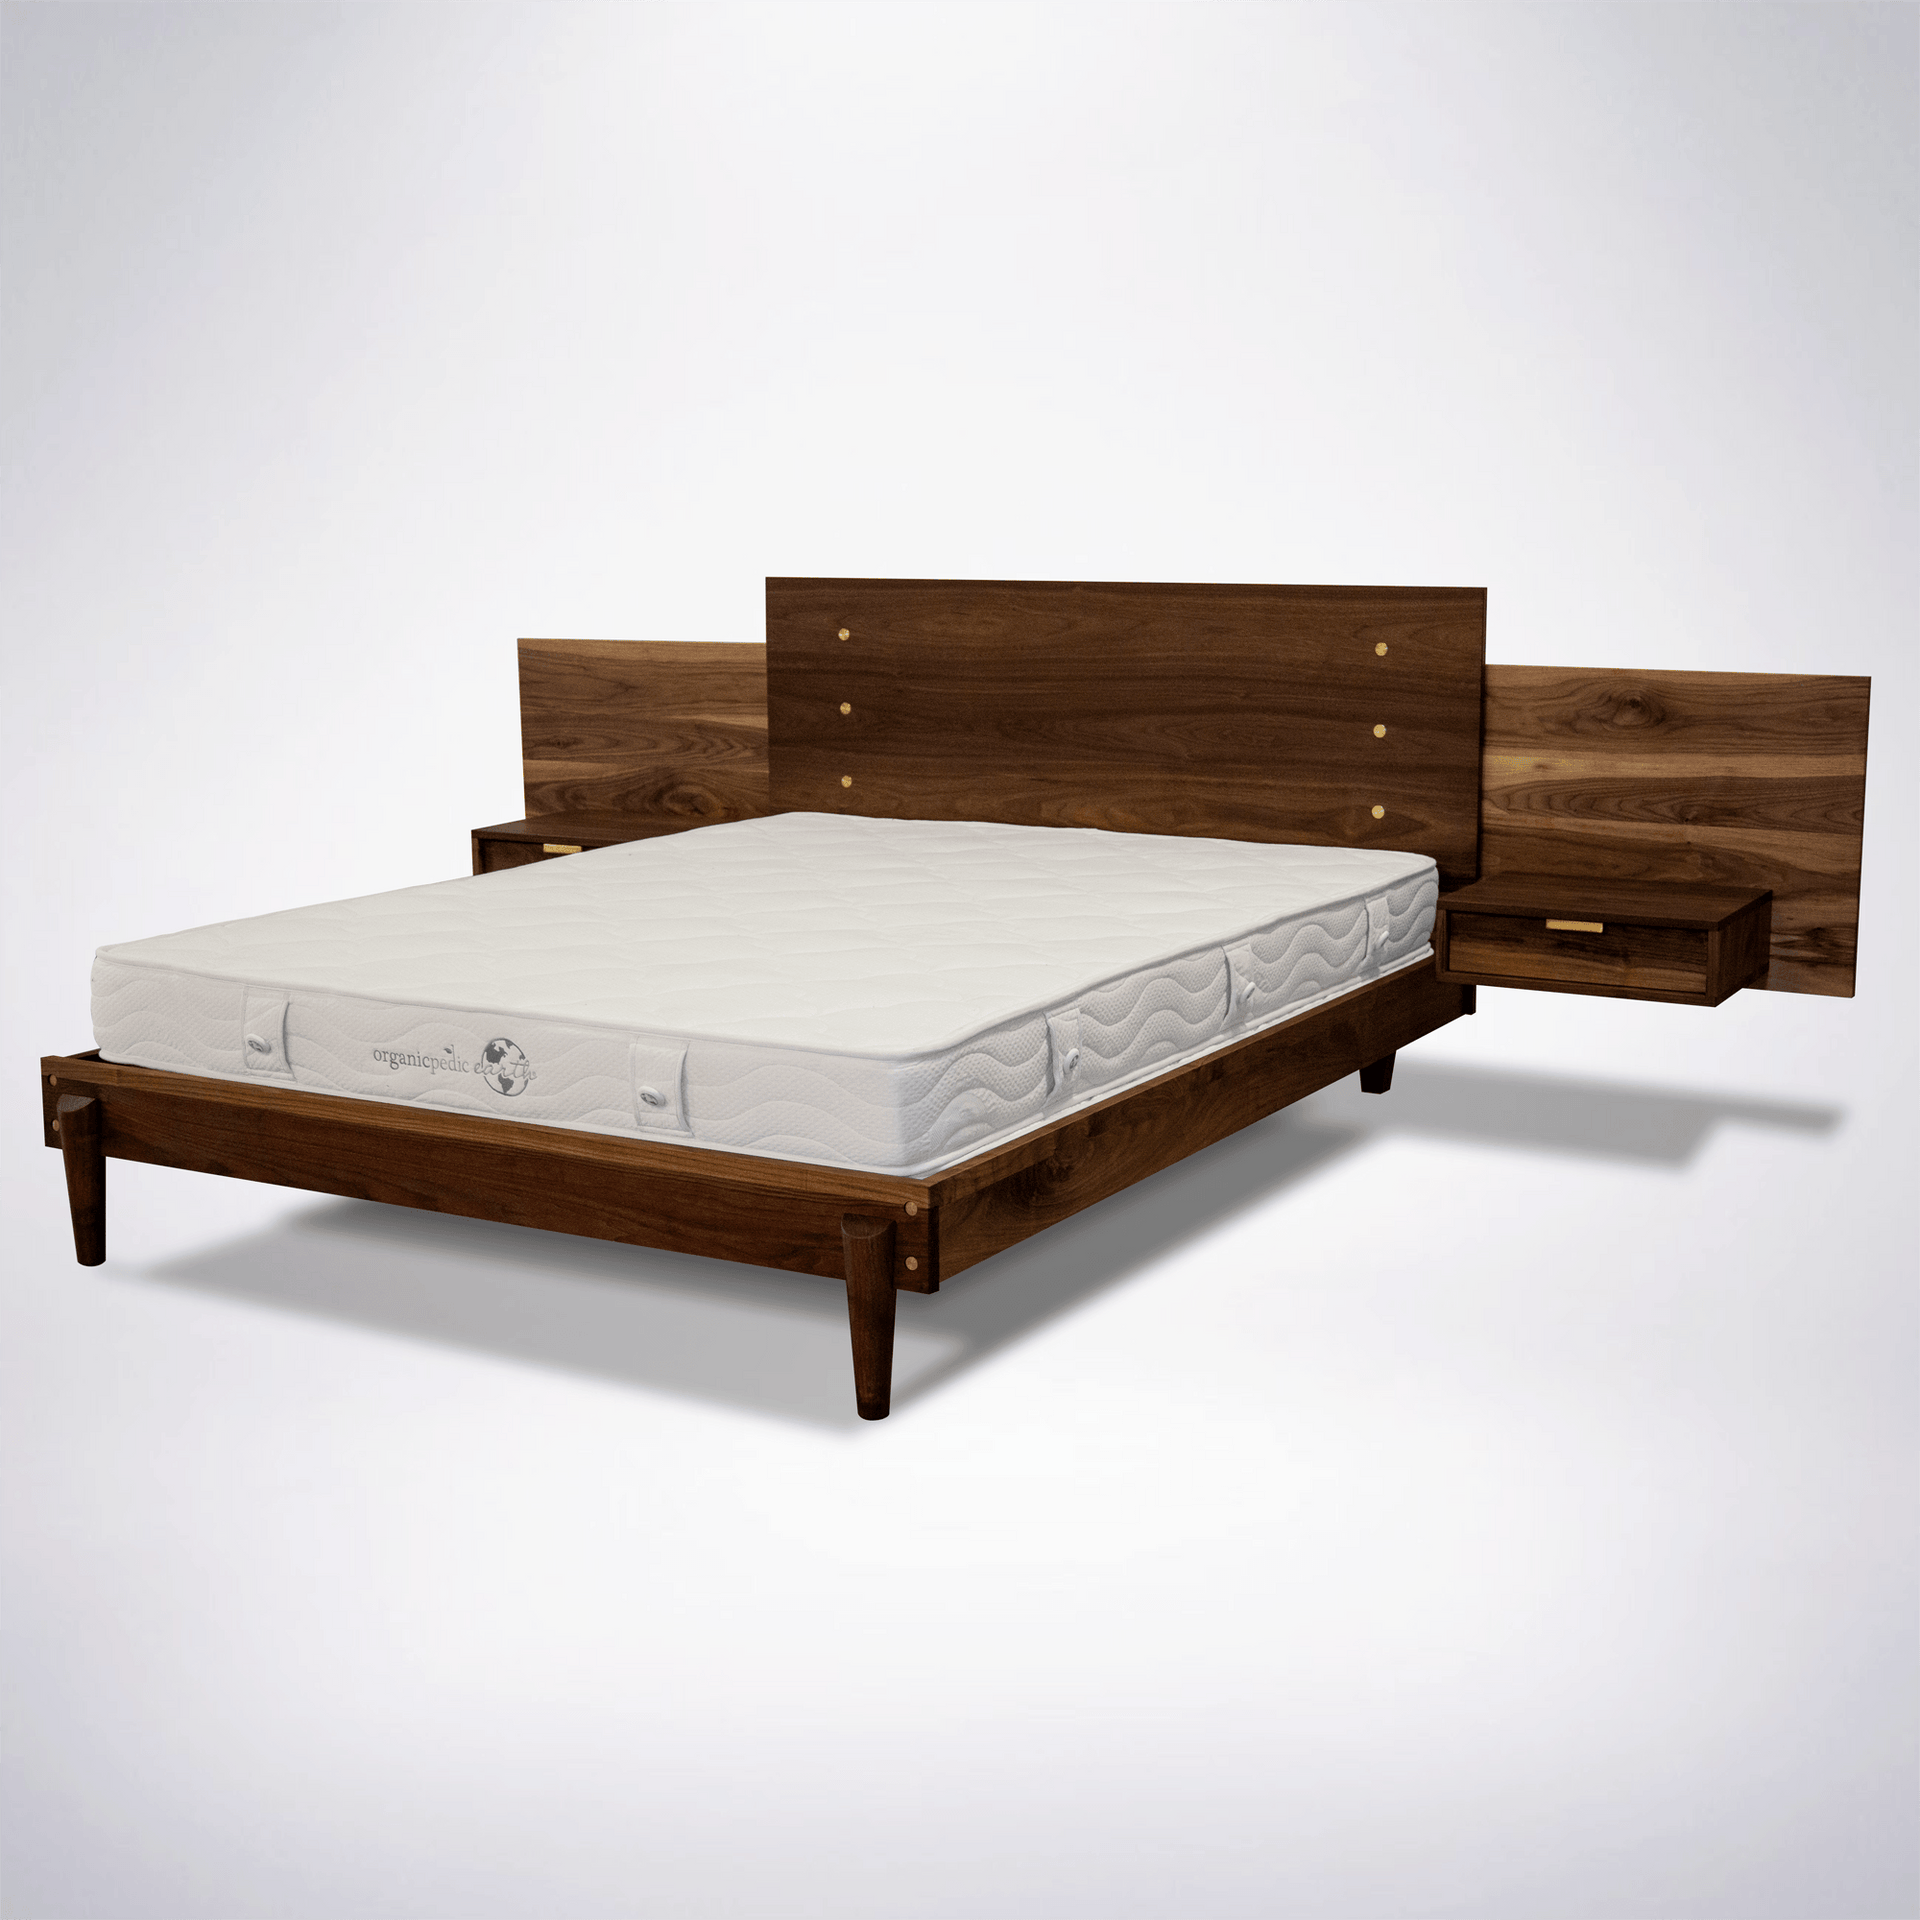 Solid wood bed frame with integrated tables and brass hardware